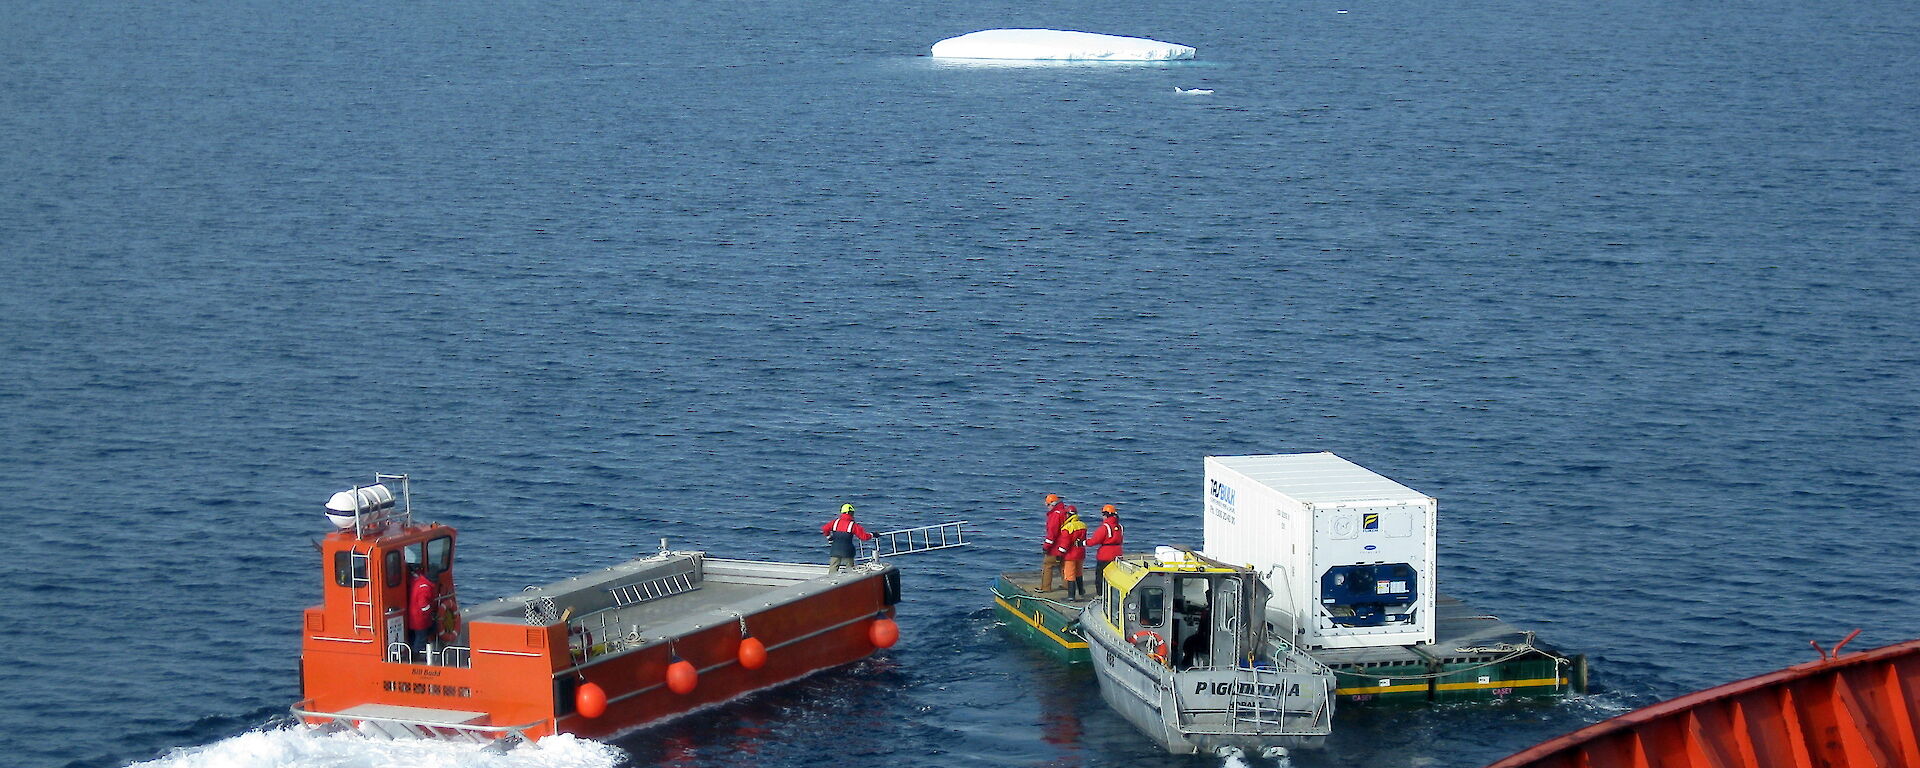 A barge delivering a refrigerated container from the ship to Casey research station.